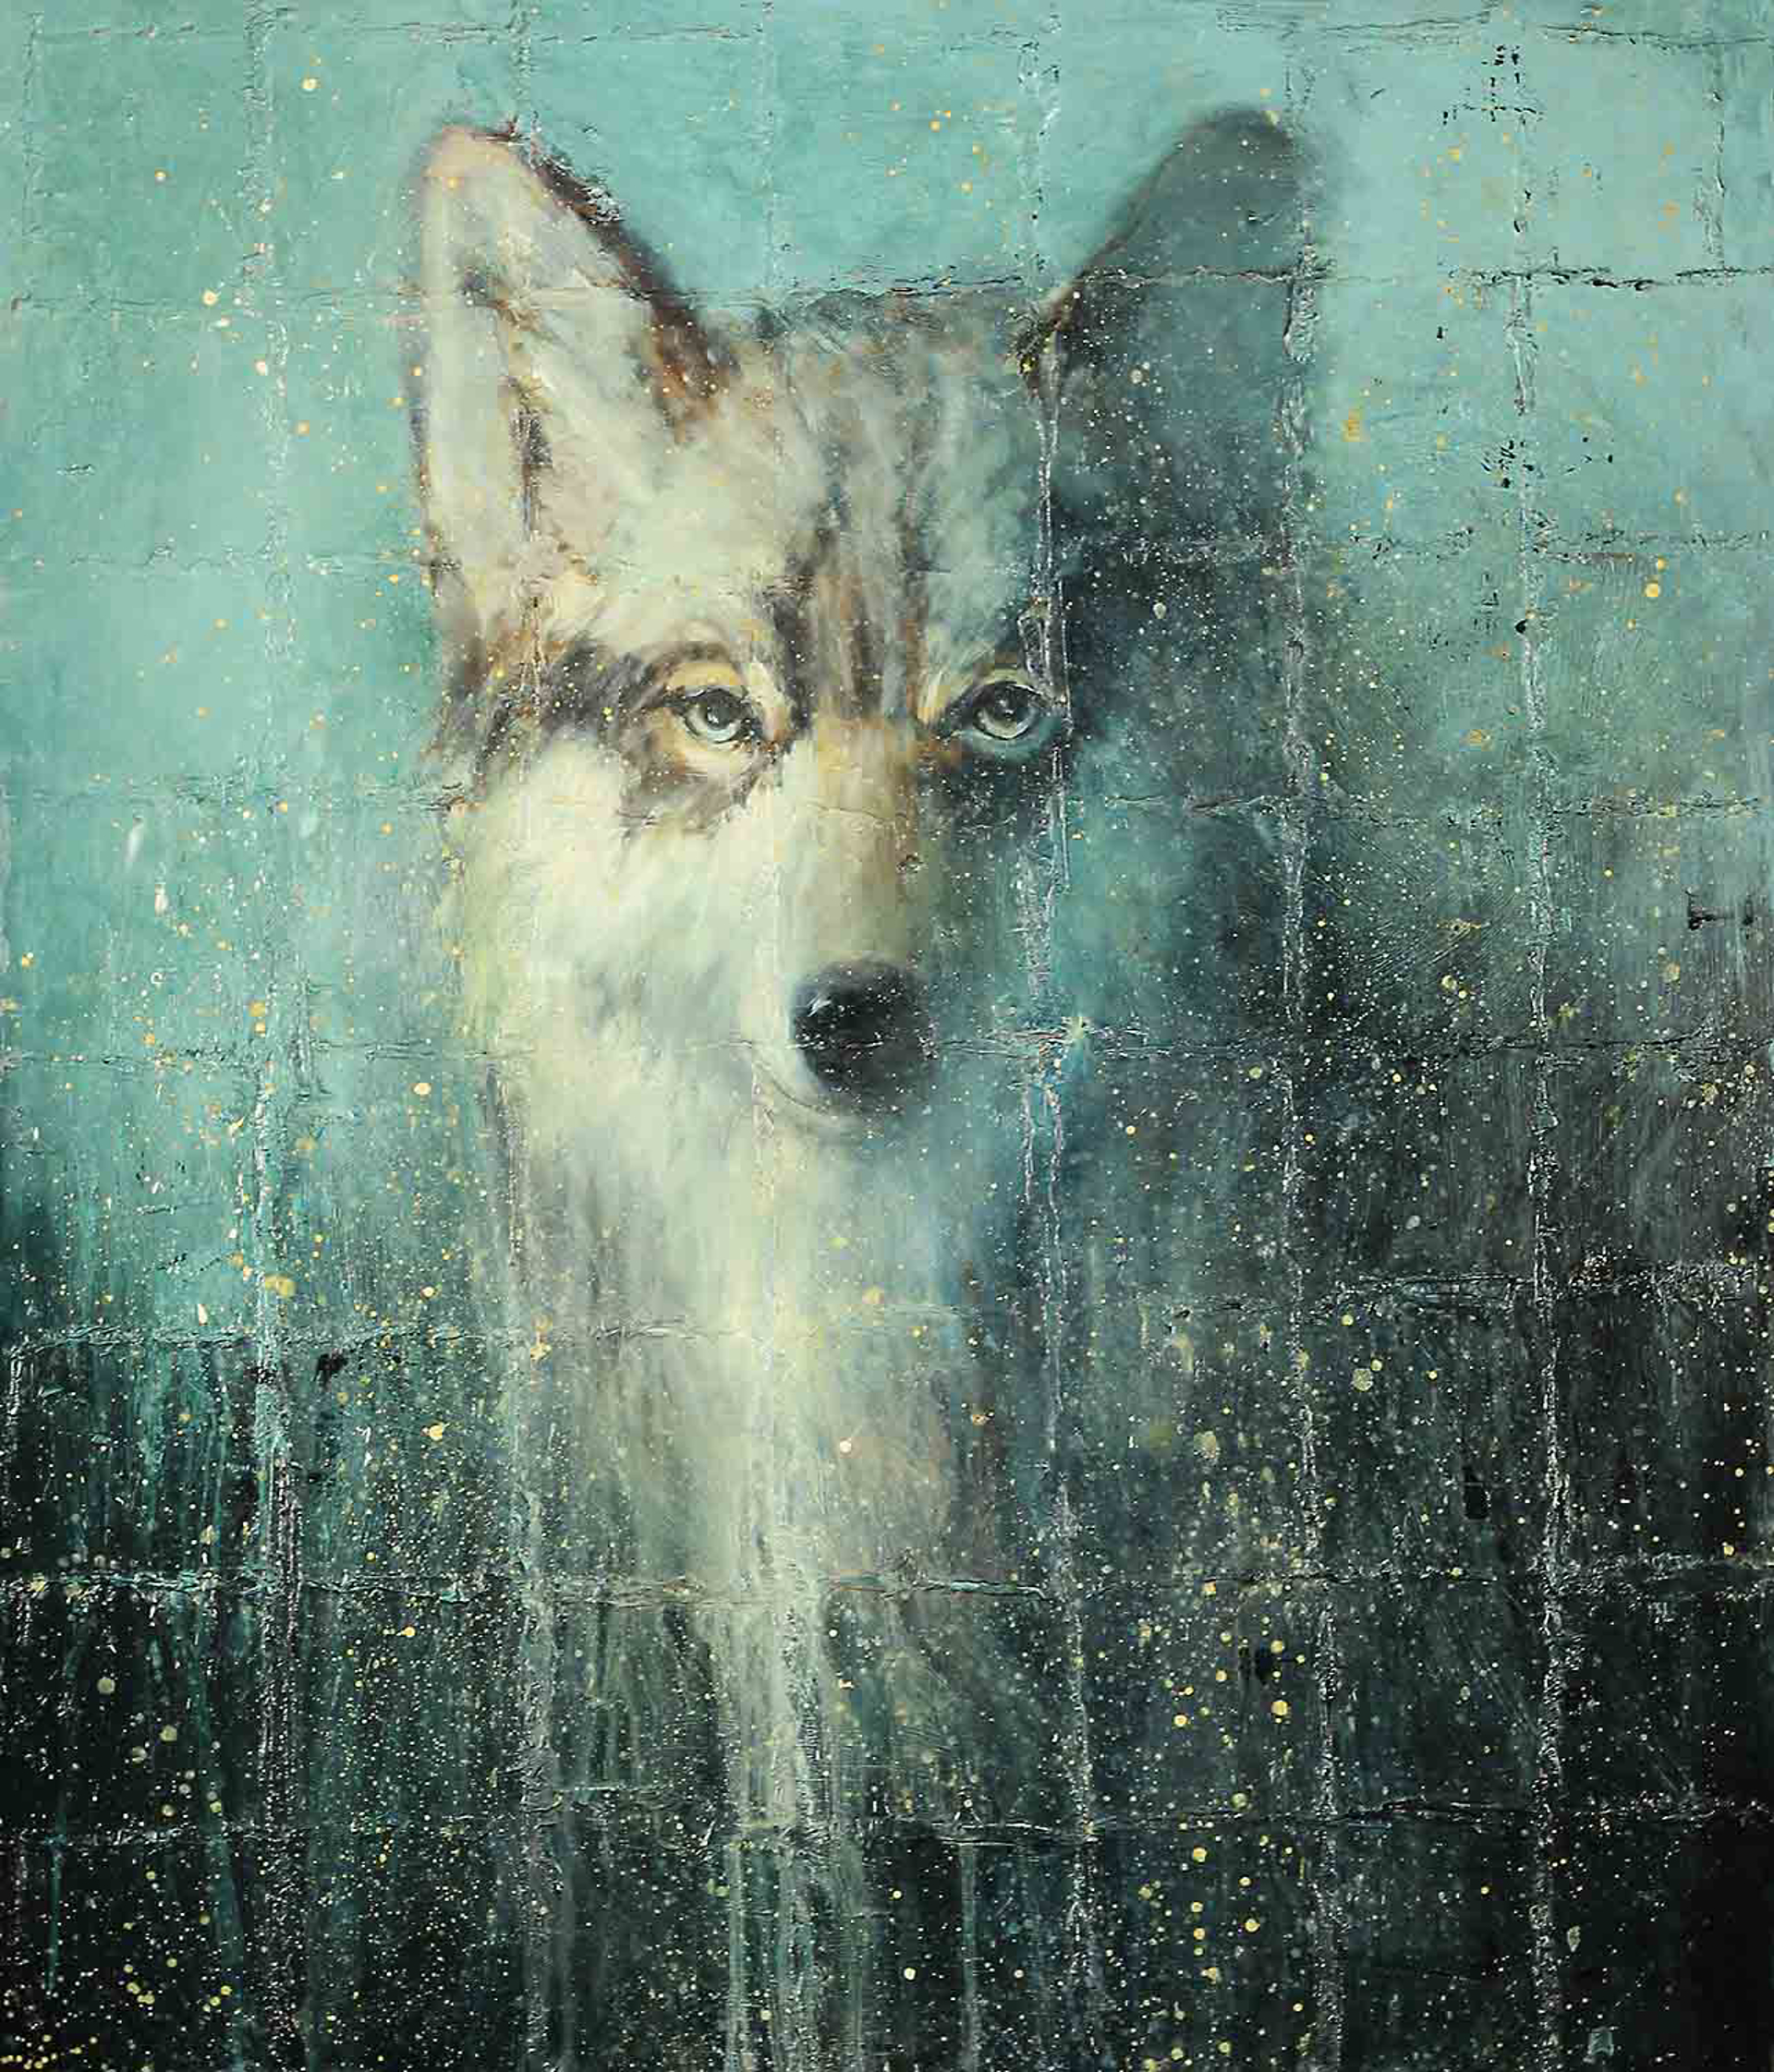 An Original Contemporary Fine Art Painting Of A Wolf With A Blue and Black Abstract Background By Matt Flint Using Mixed Media On Panel